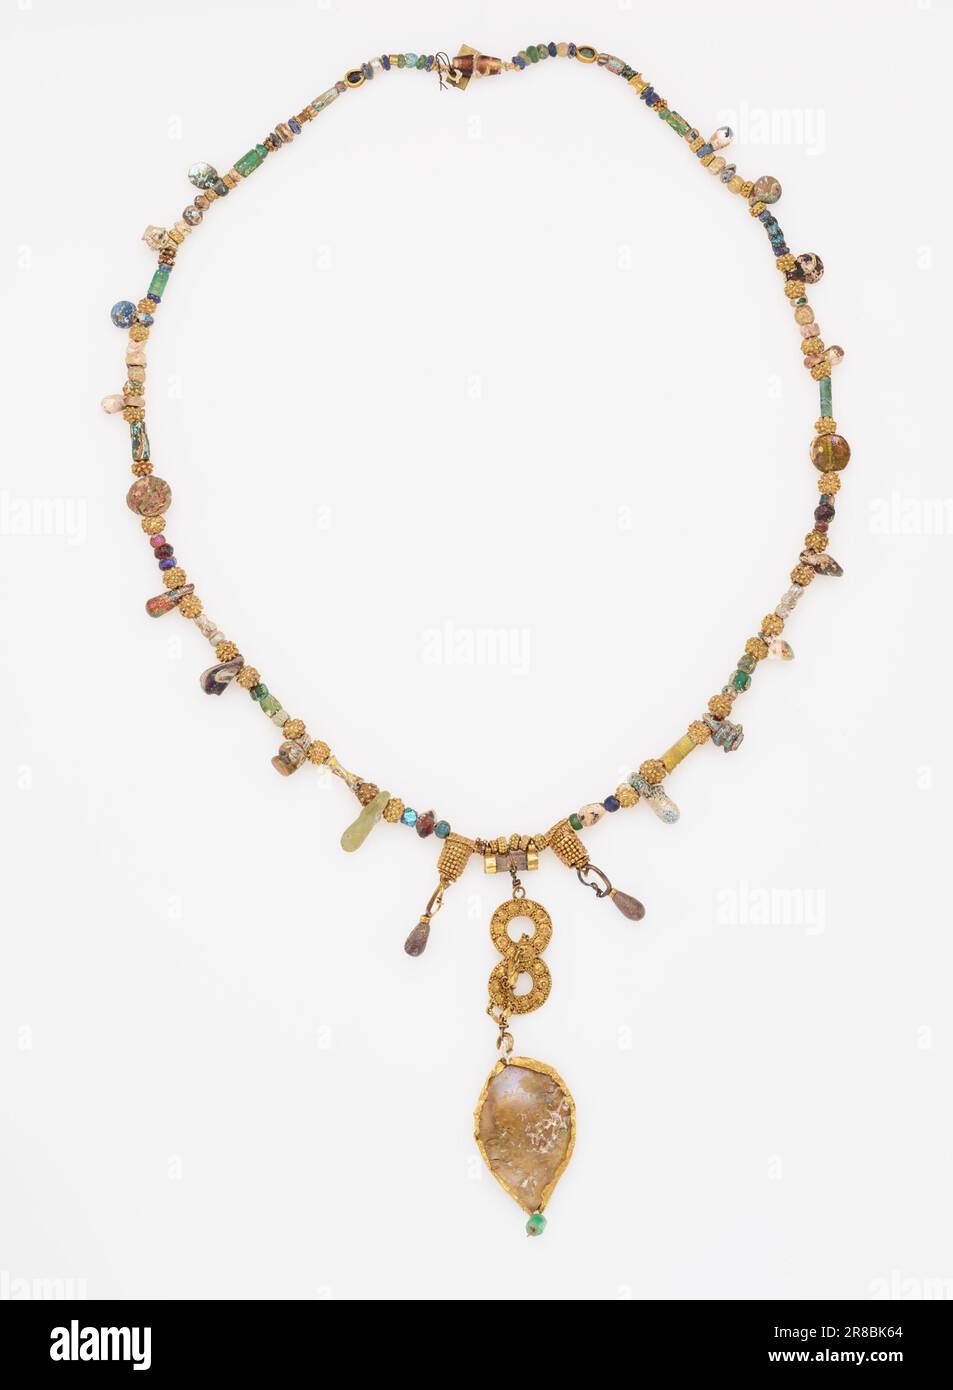 Necklace 300-200 B.C. by Unidentified Stock Photo